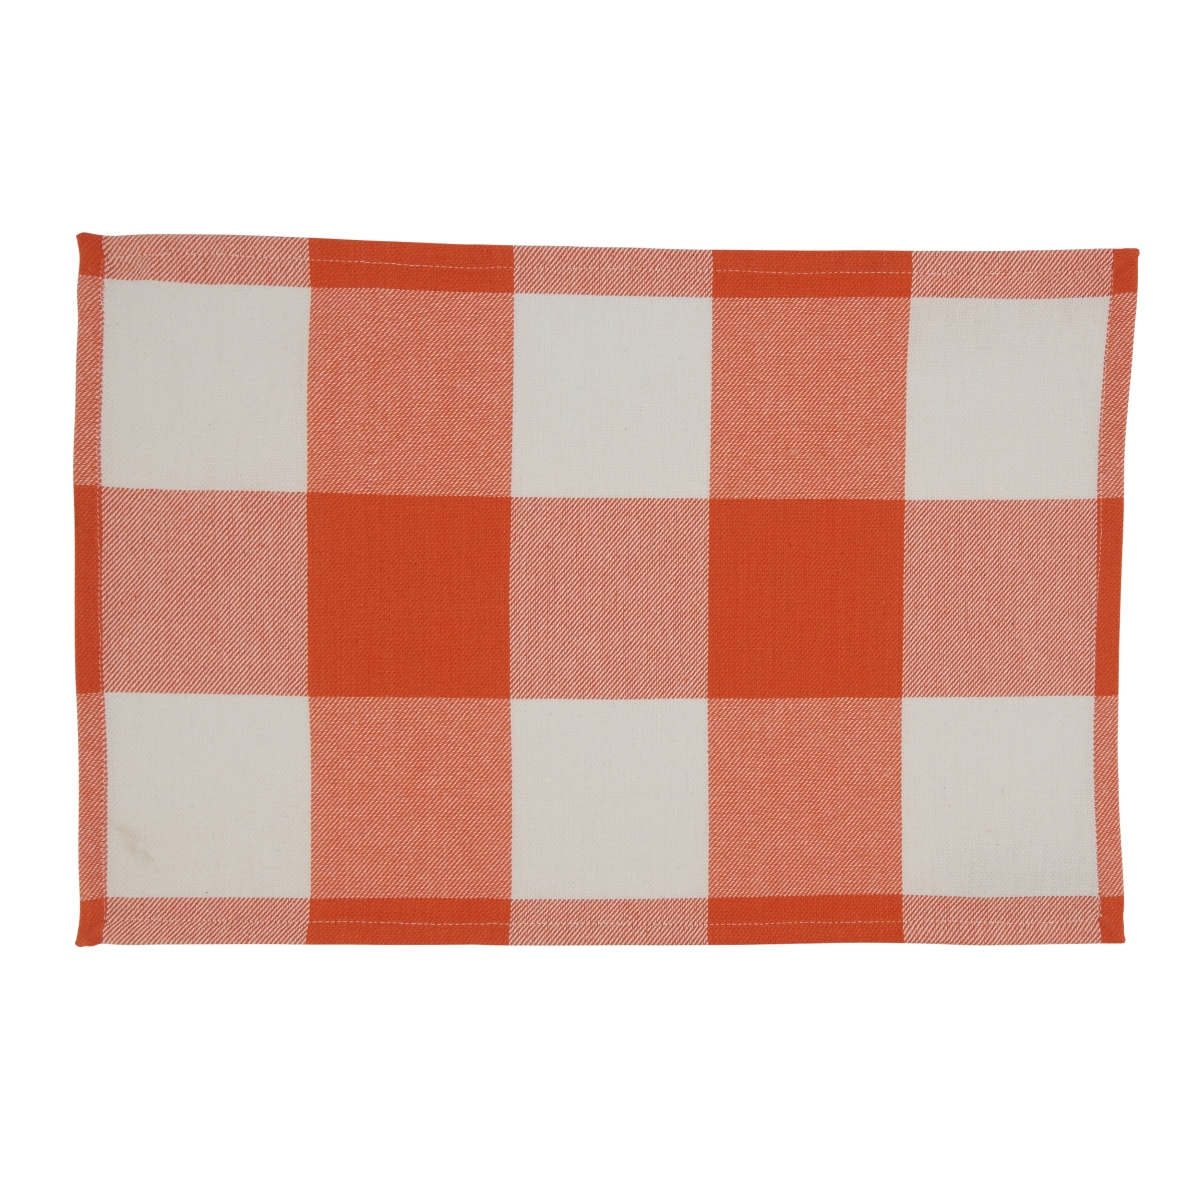 Picture of Saro Lifestyle 5340.OR1420B 14 x 20 in. Buffalo Plaid Oblong Placemat, Orange - Set of 4